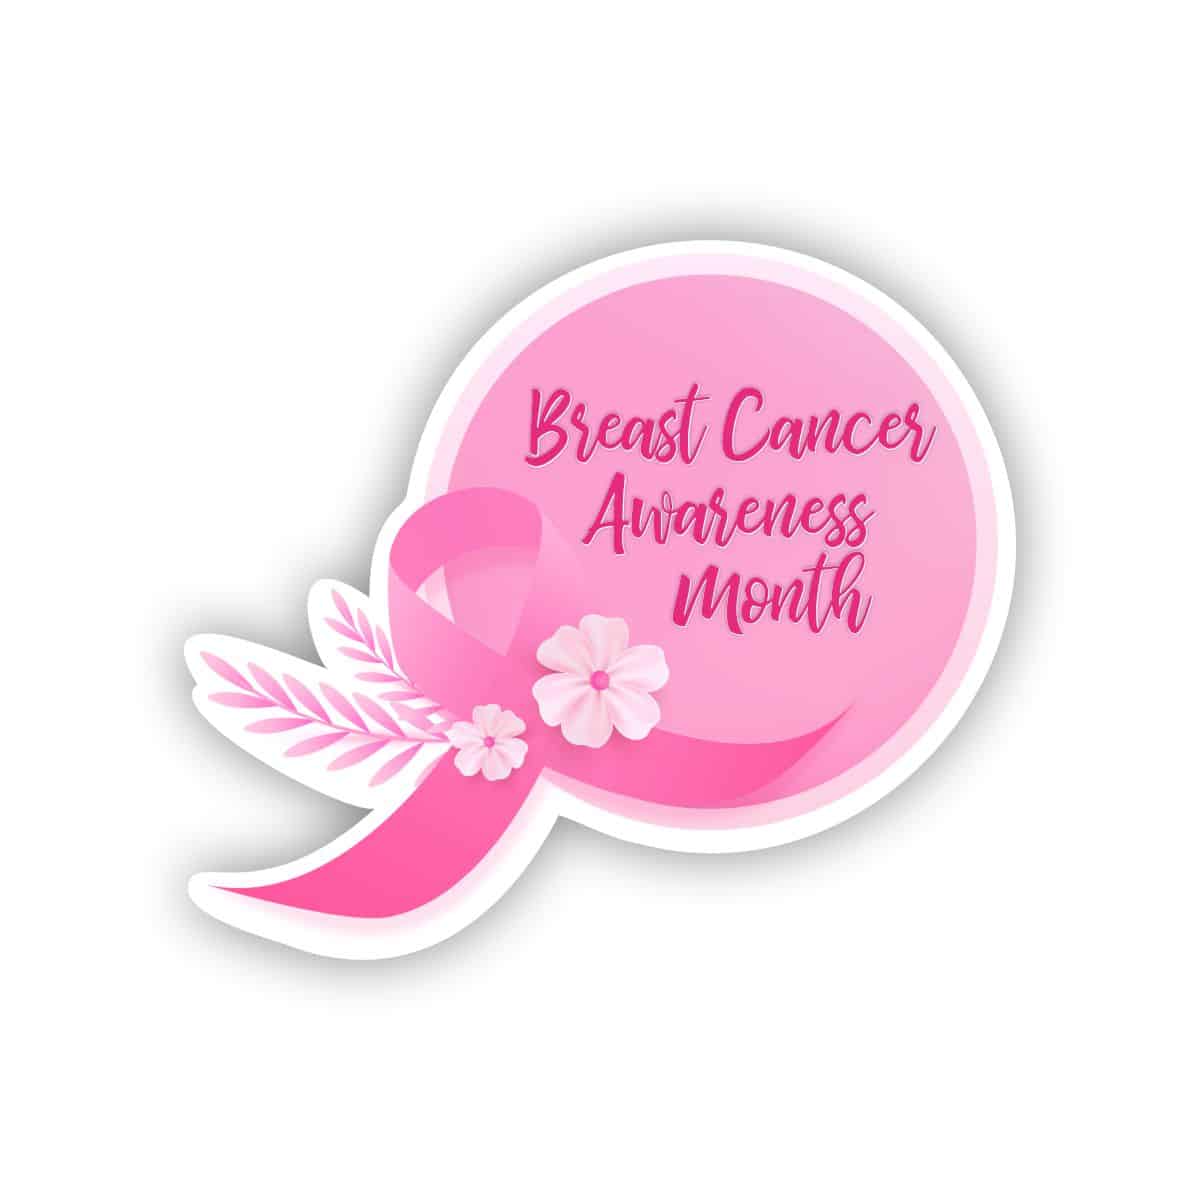 Breast Cancer Awareness Month, Breast Cancer Awareness